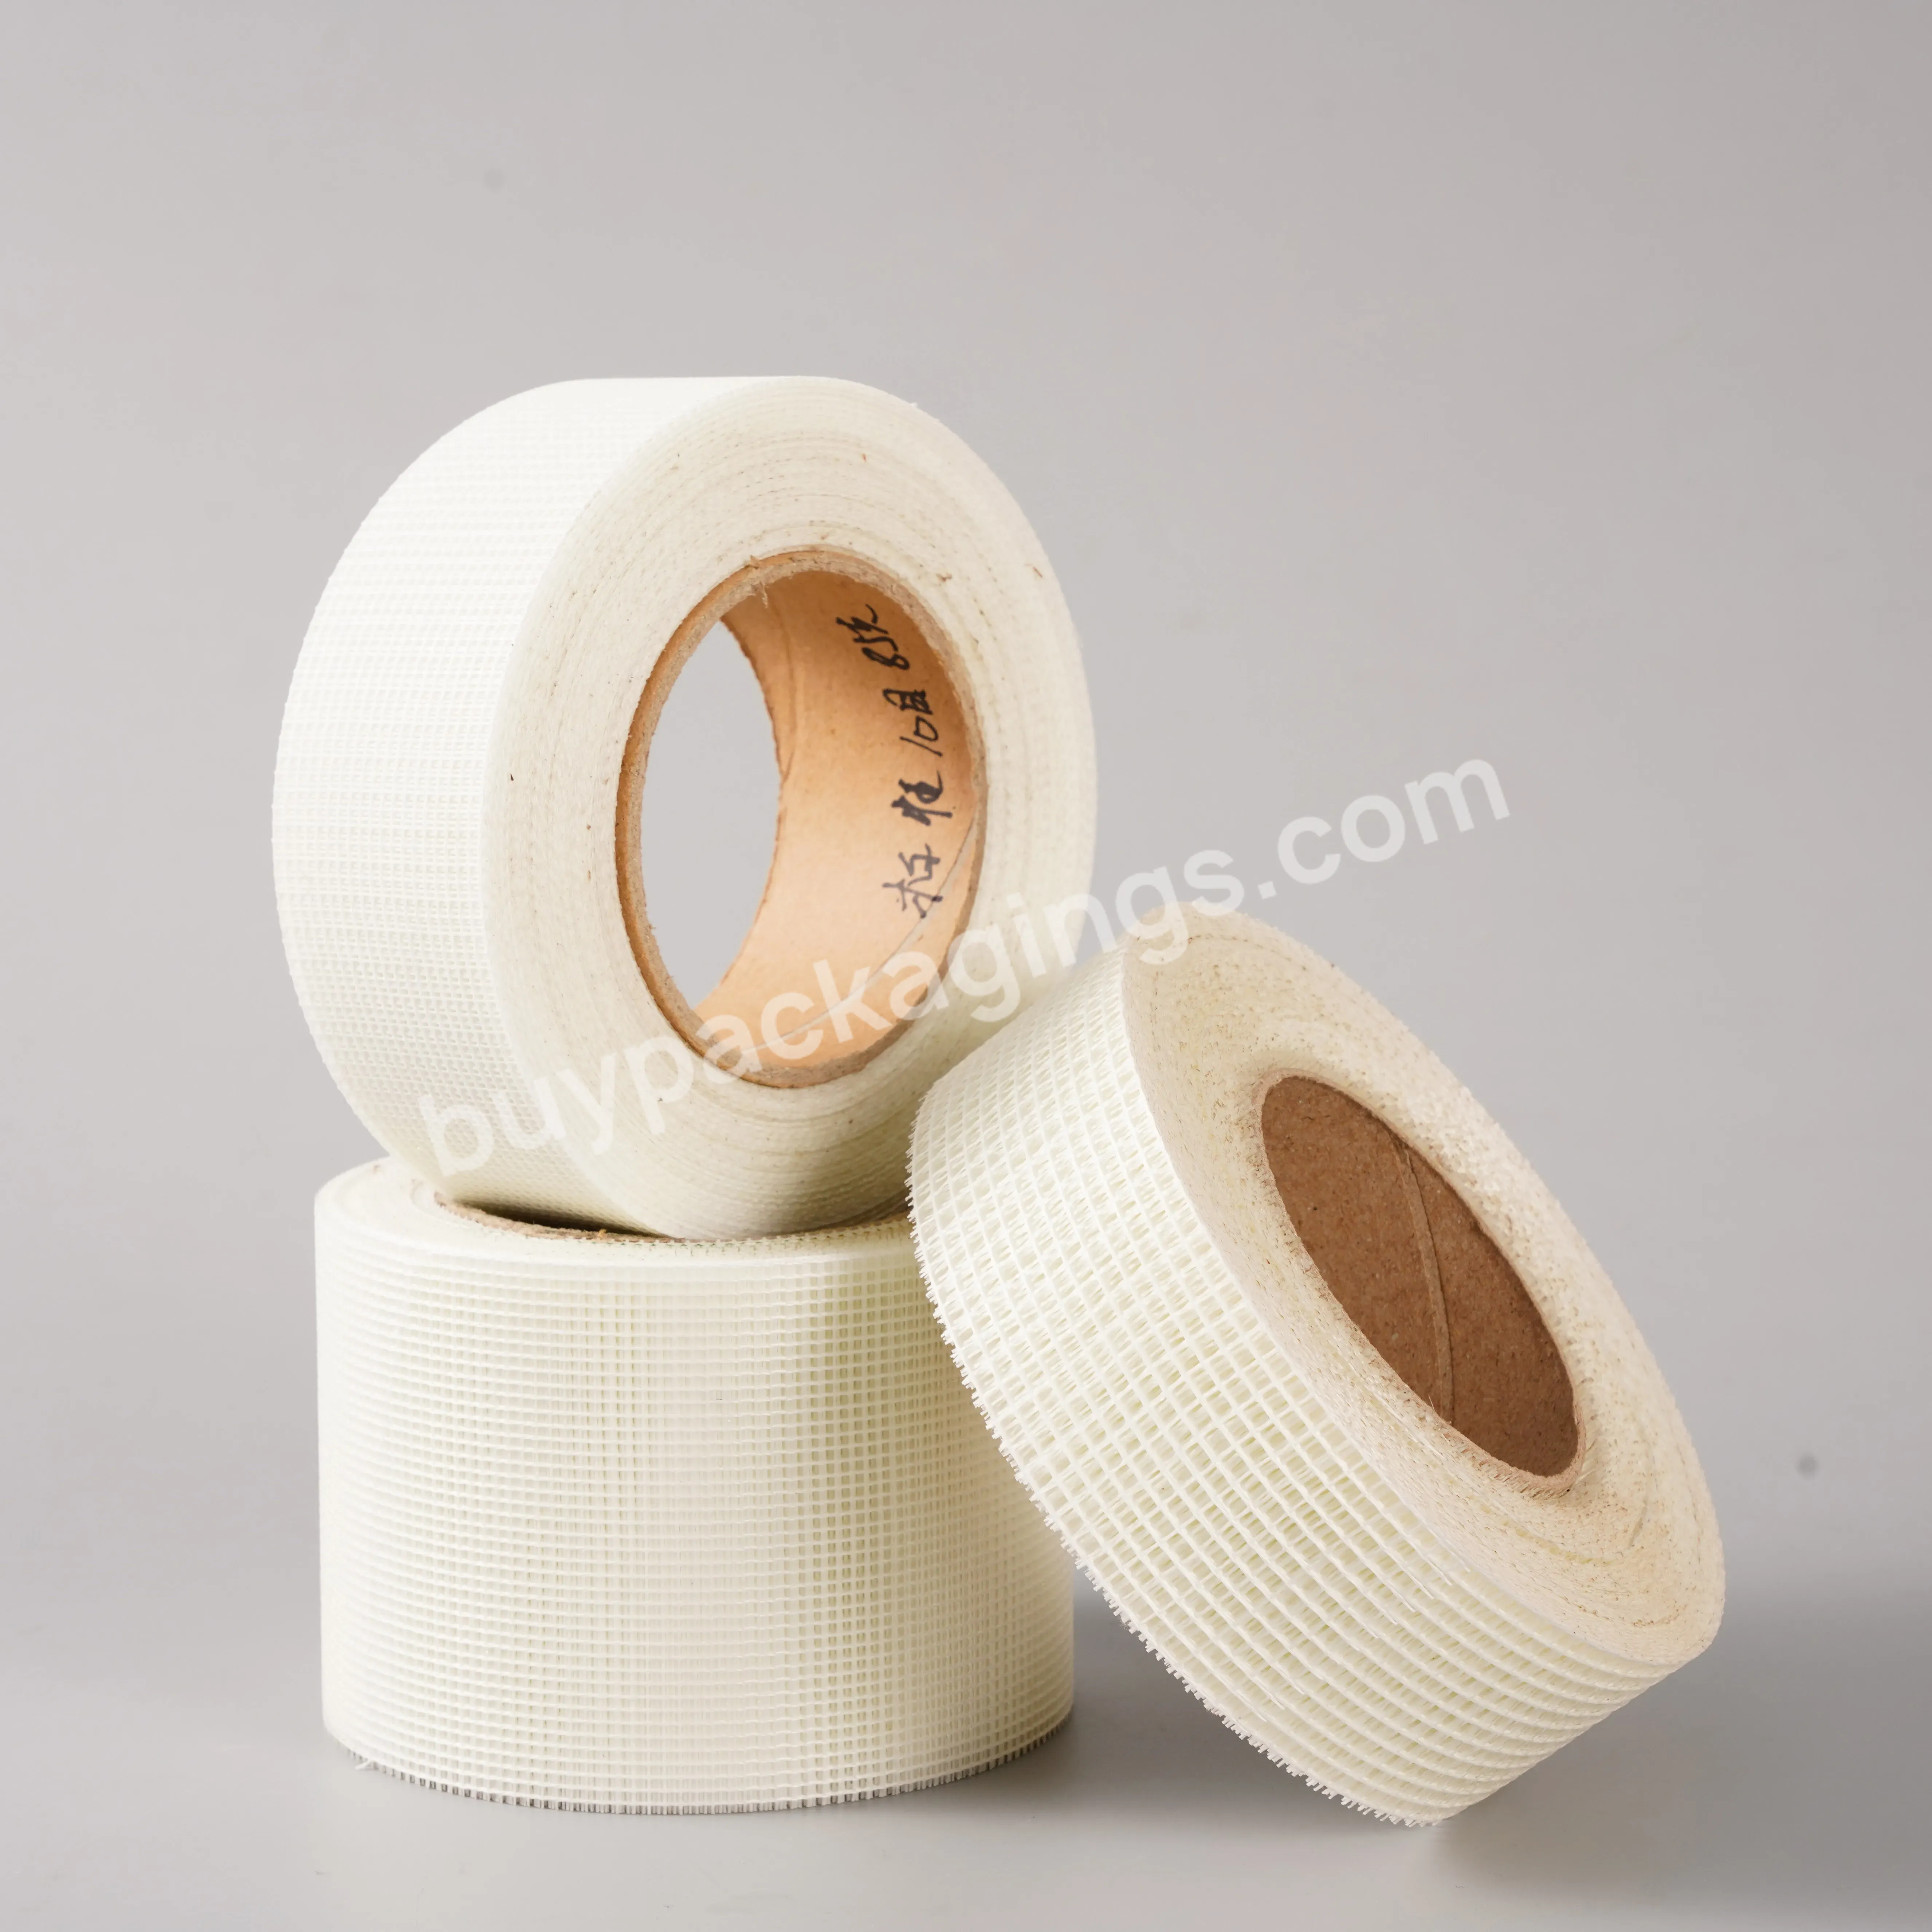 Decorate Self-adhesive Mesh With Seam Belt For Exterior Wall Body - Buy Mesh Fiber Tape Gum Backing Filament Tape Cross-weaved 50mm,Adhesive Cloth Tape,Double Sided Mesh Tape.